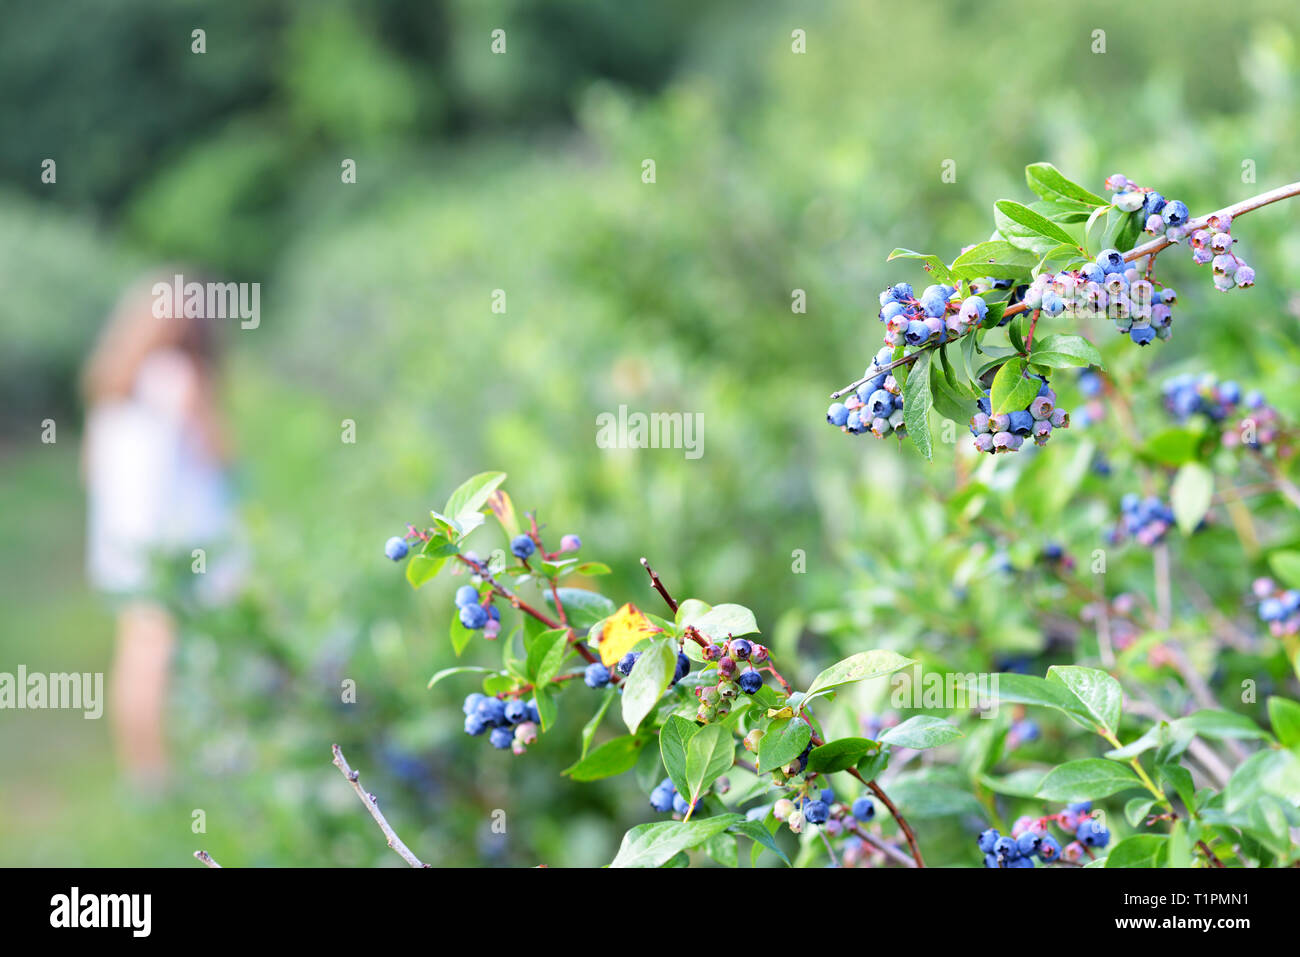 Blueberry bush detail, ripe blueberries on branch. Out of focus girl in background, harvesting in the orchard Stock Photo